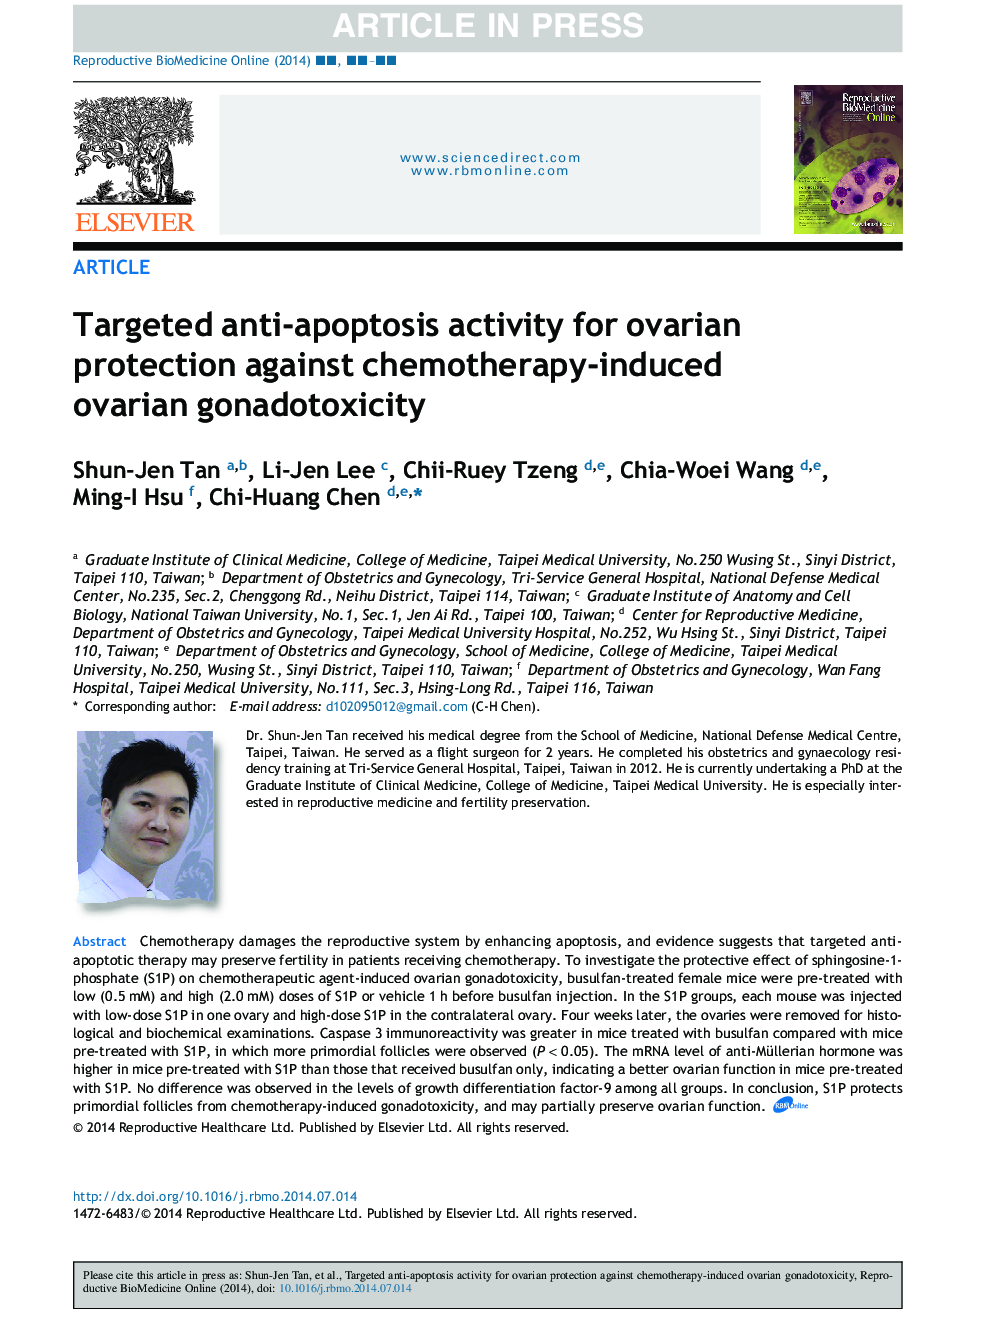 Targeted anti-apoptosis activity for ovarian protection against chemotherapy-induced ovarian gonadotoxicity